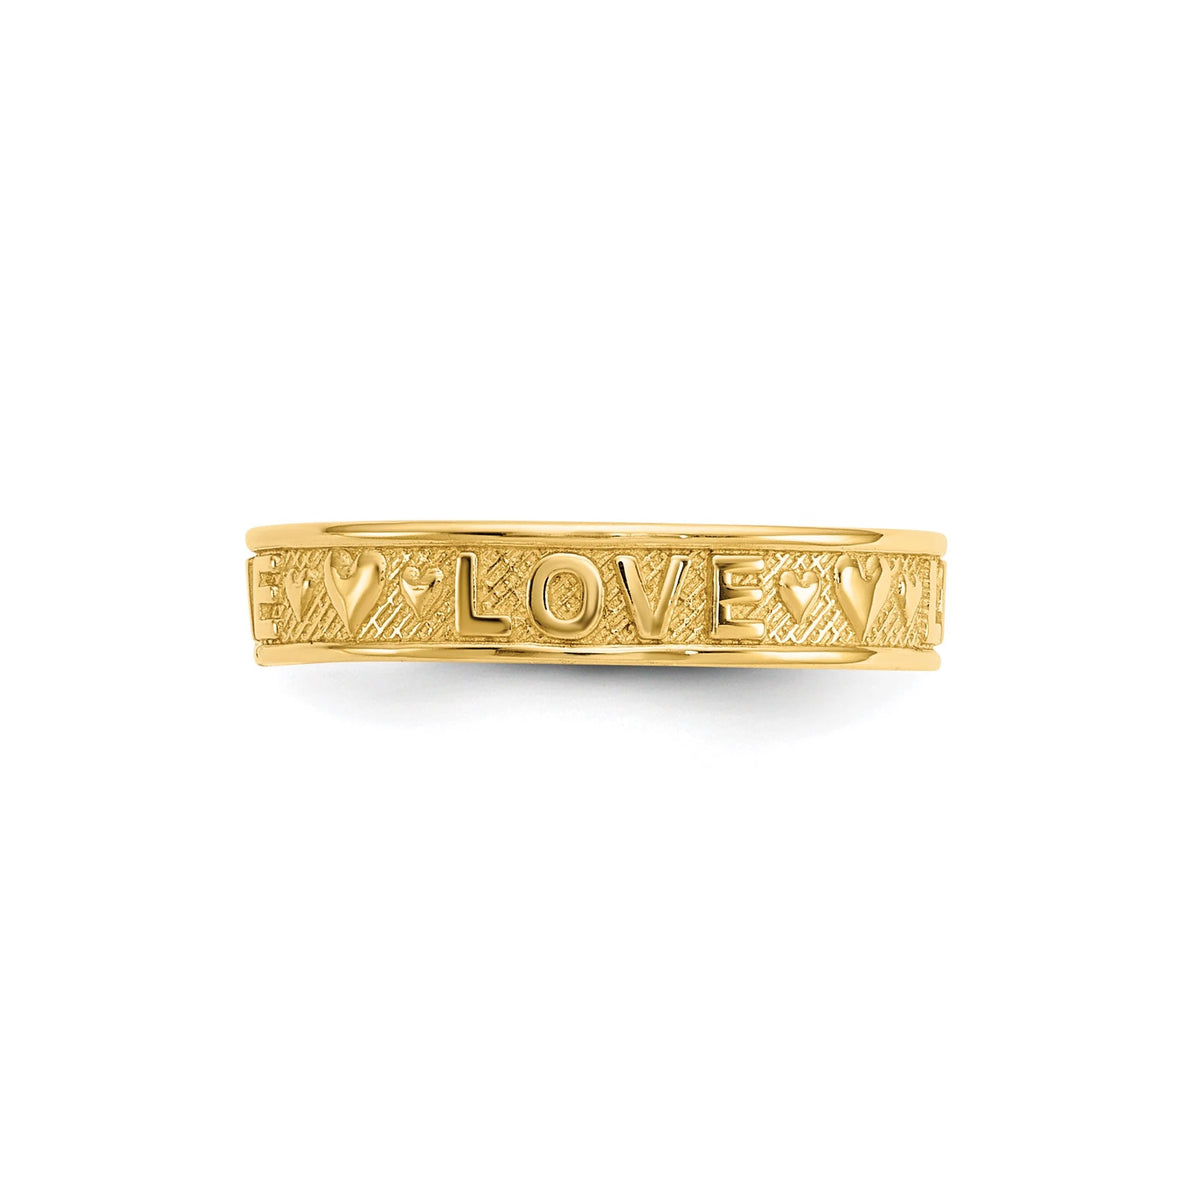 14k Yellow Gold LOVE and Hearts Toe Ring 3mm Band- Gift Box Included - Made in U.S.A.